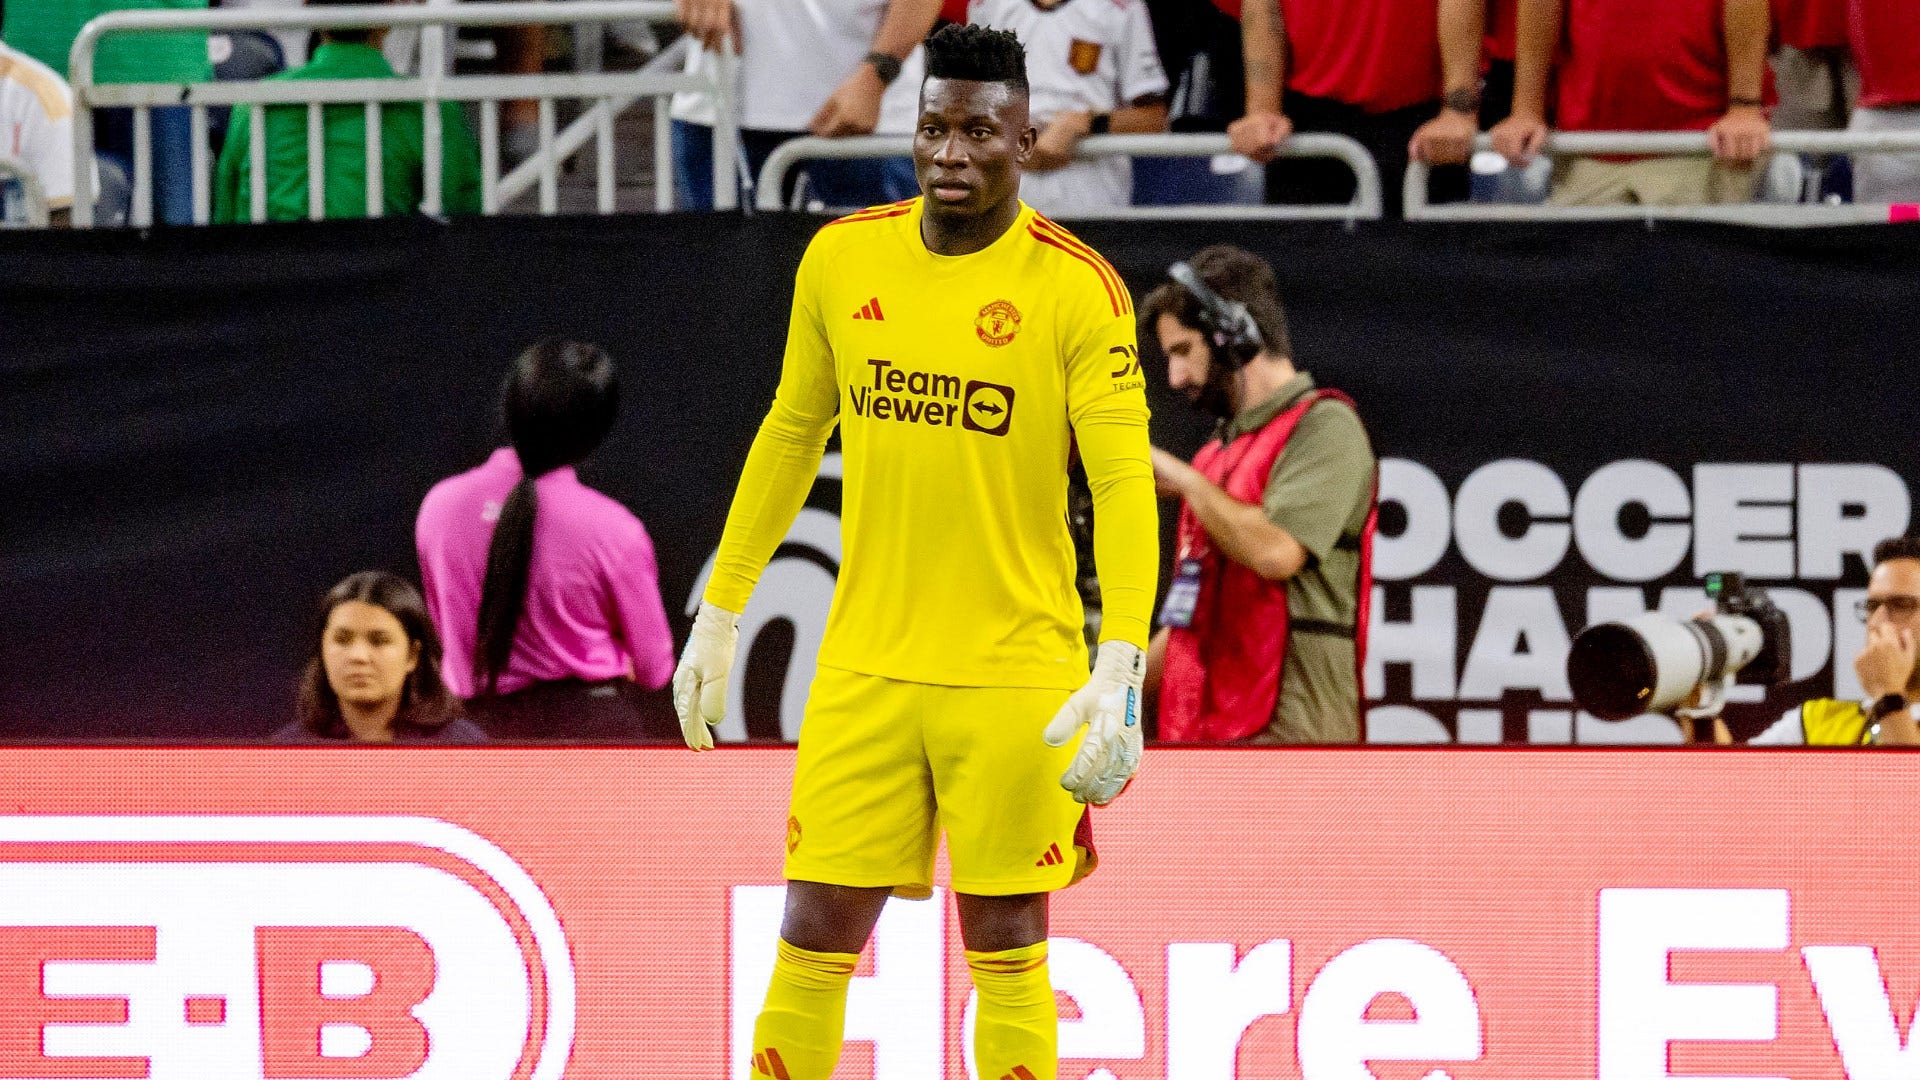  Andre Onana, Manchester United's goalkeeper with the most saves in the Premier League, looks on during a match.